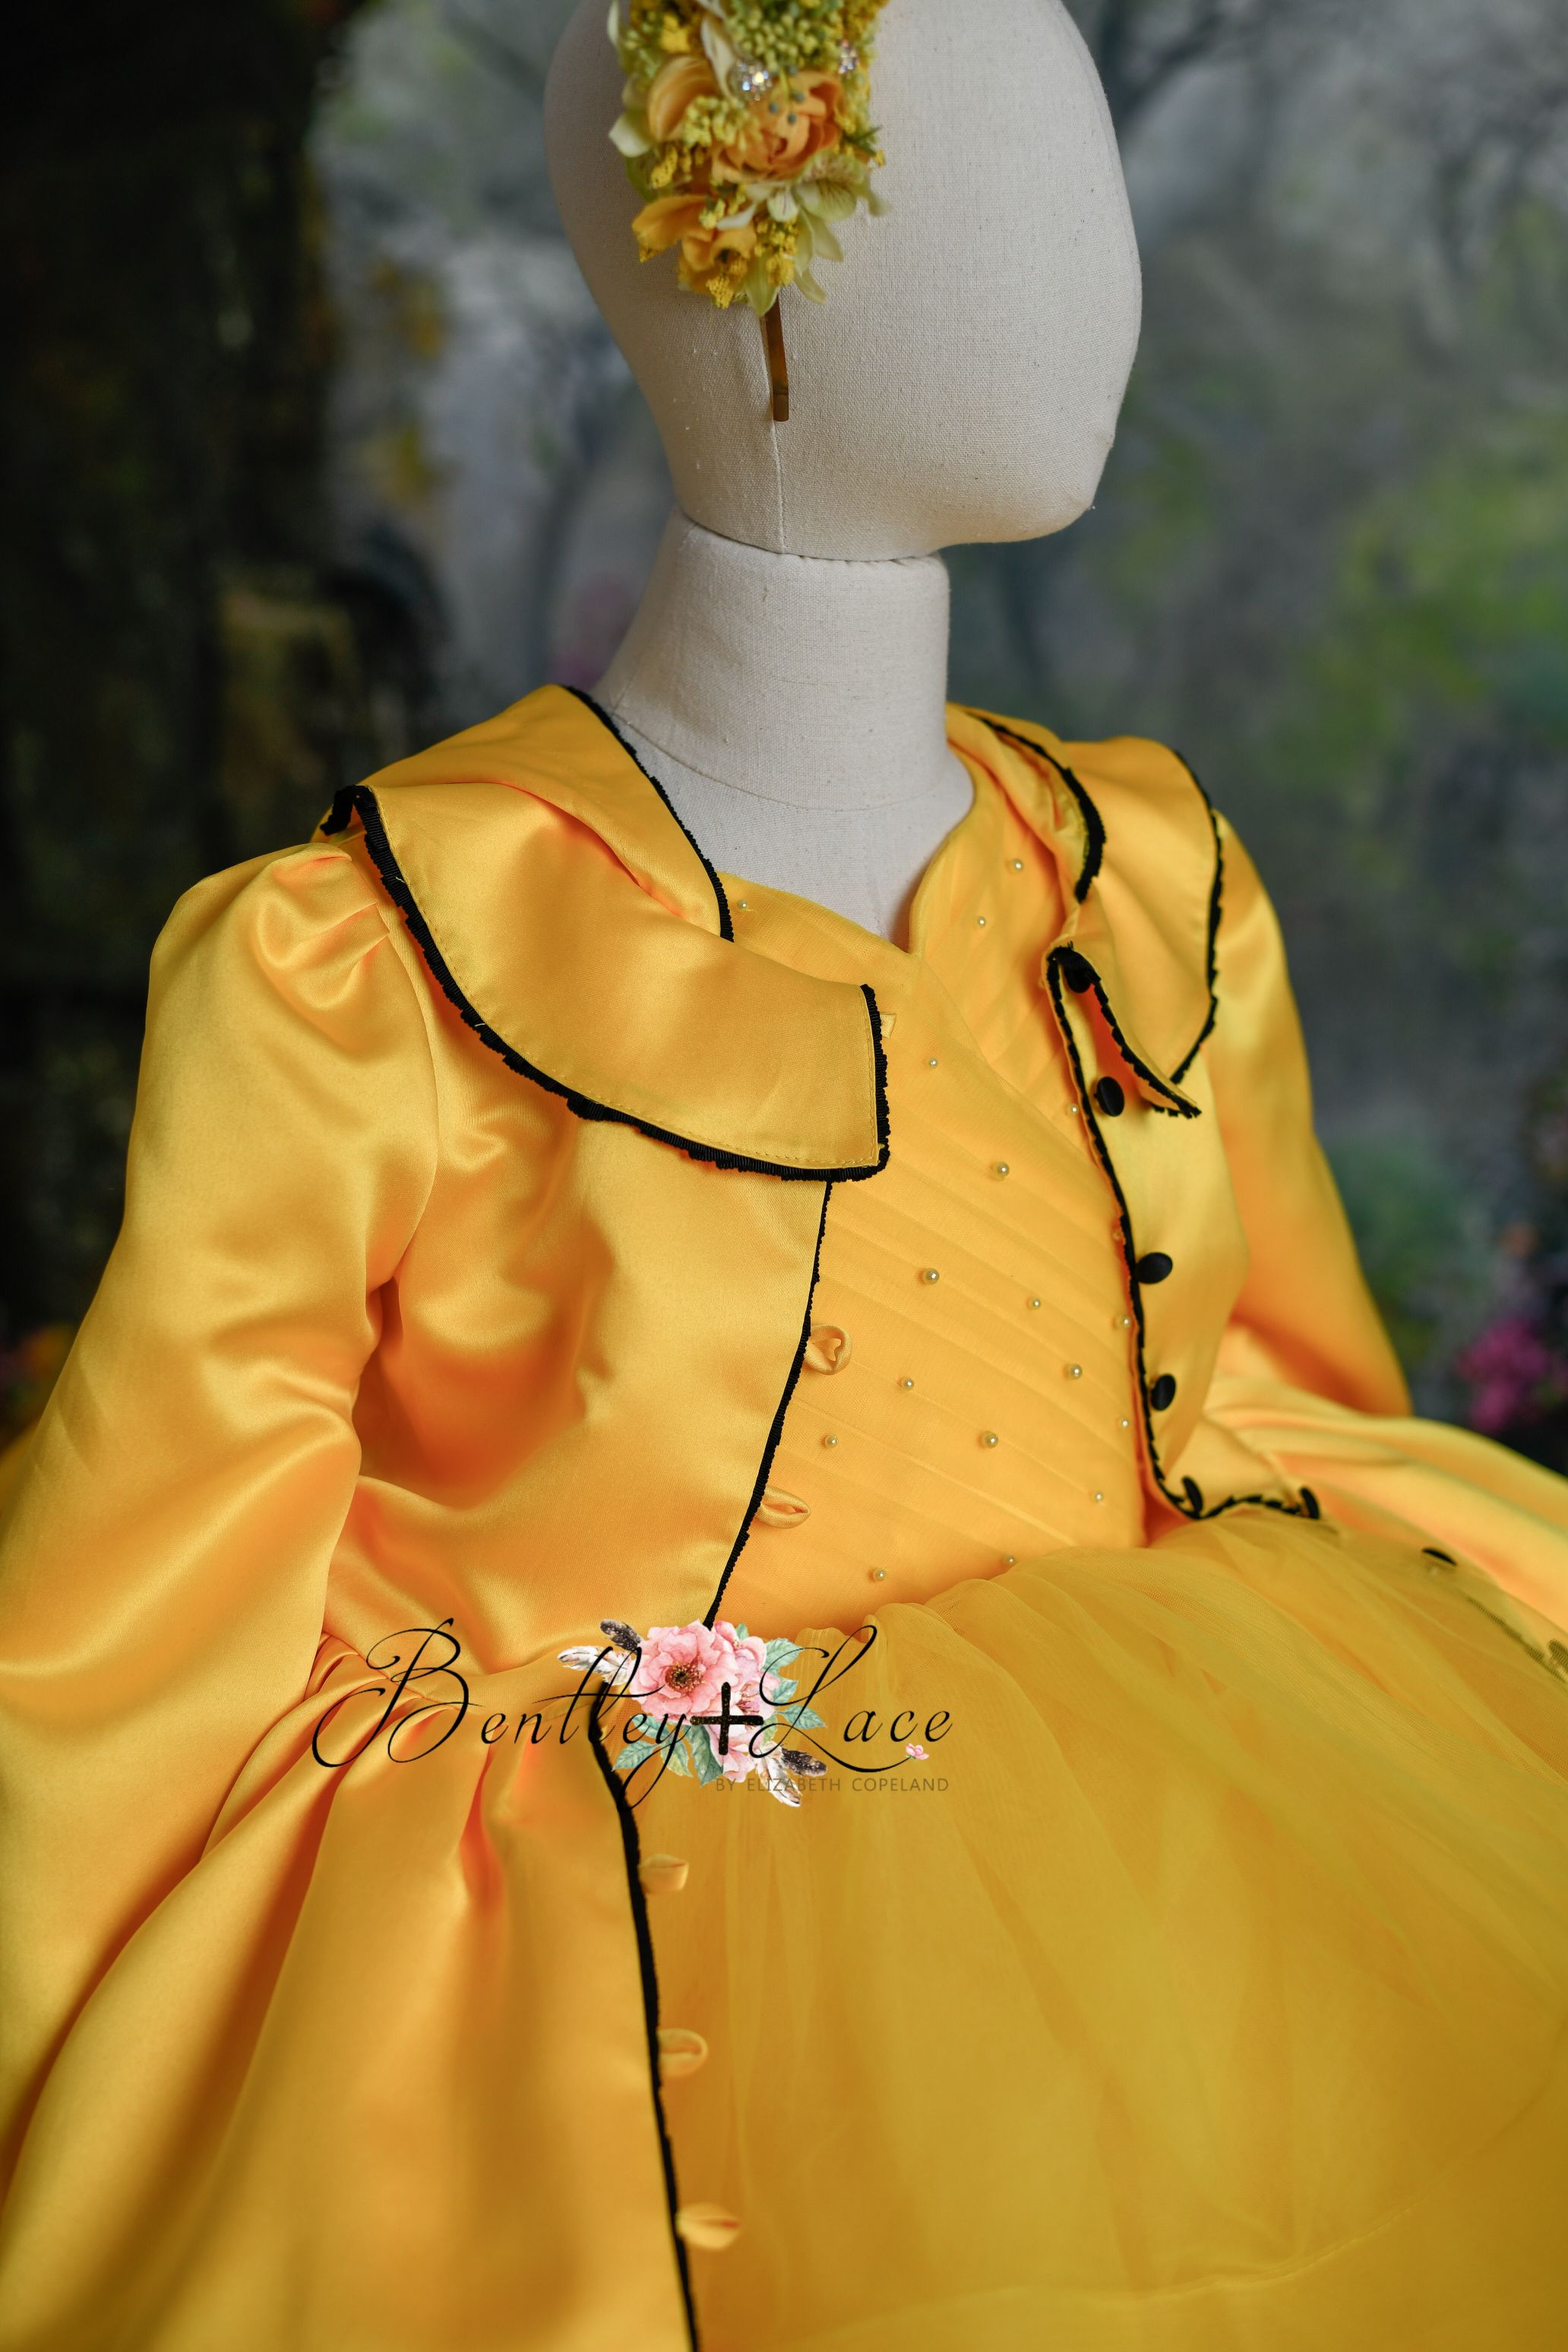 Beauty 'n Fashion: Yellow dress – the good, the fab & the lovely